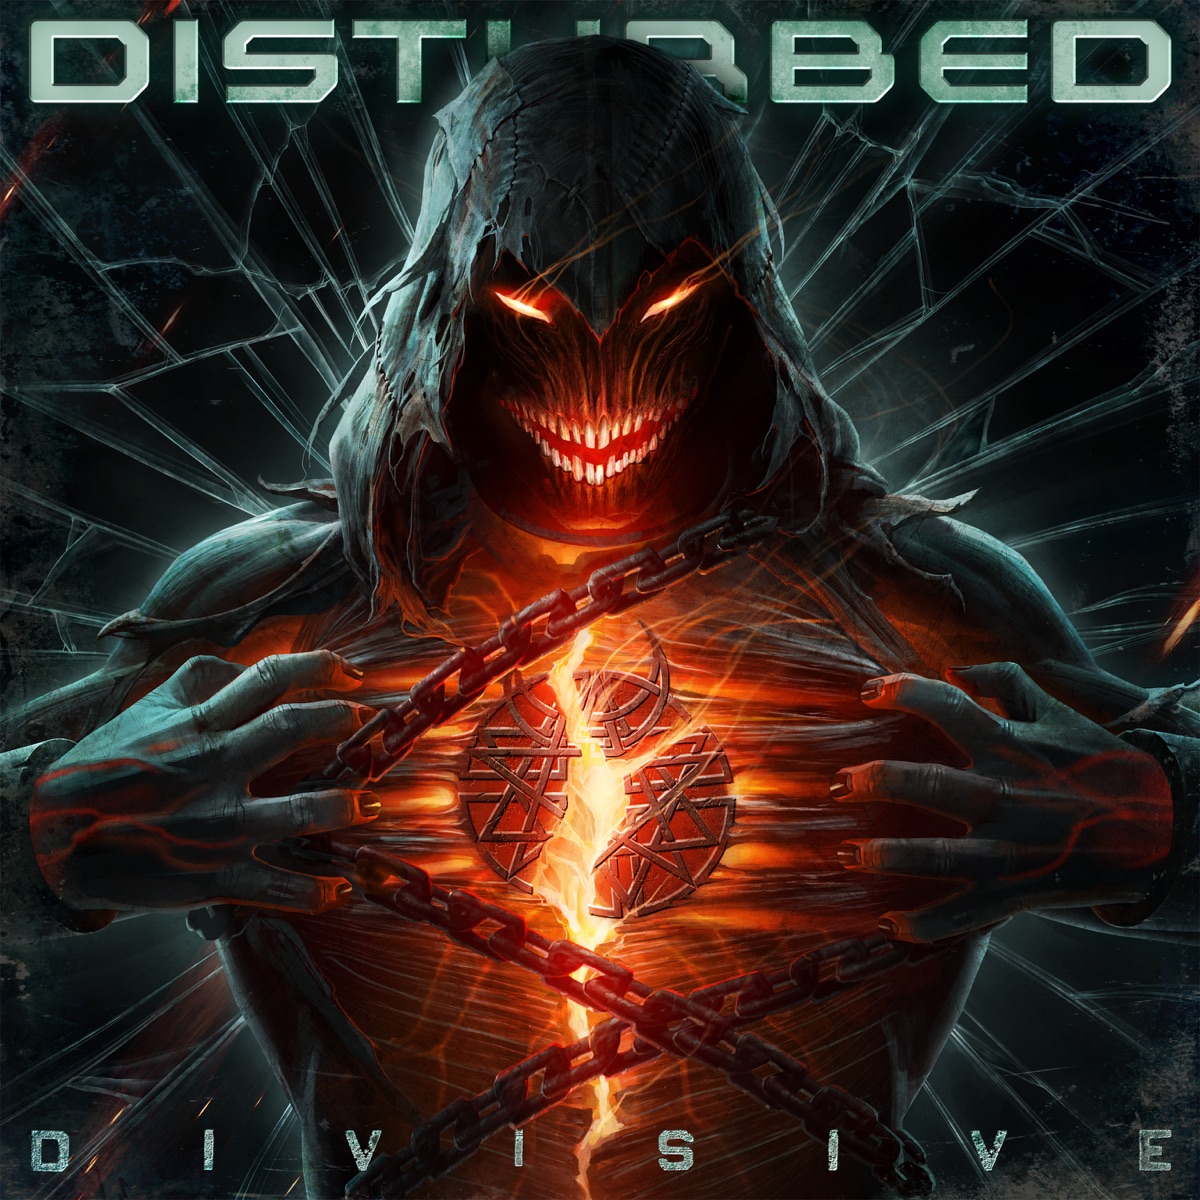 Ten Thousand Fists - Album by Disturbed - Apple Music